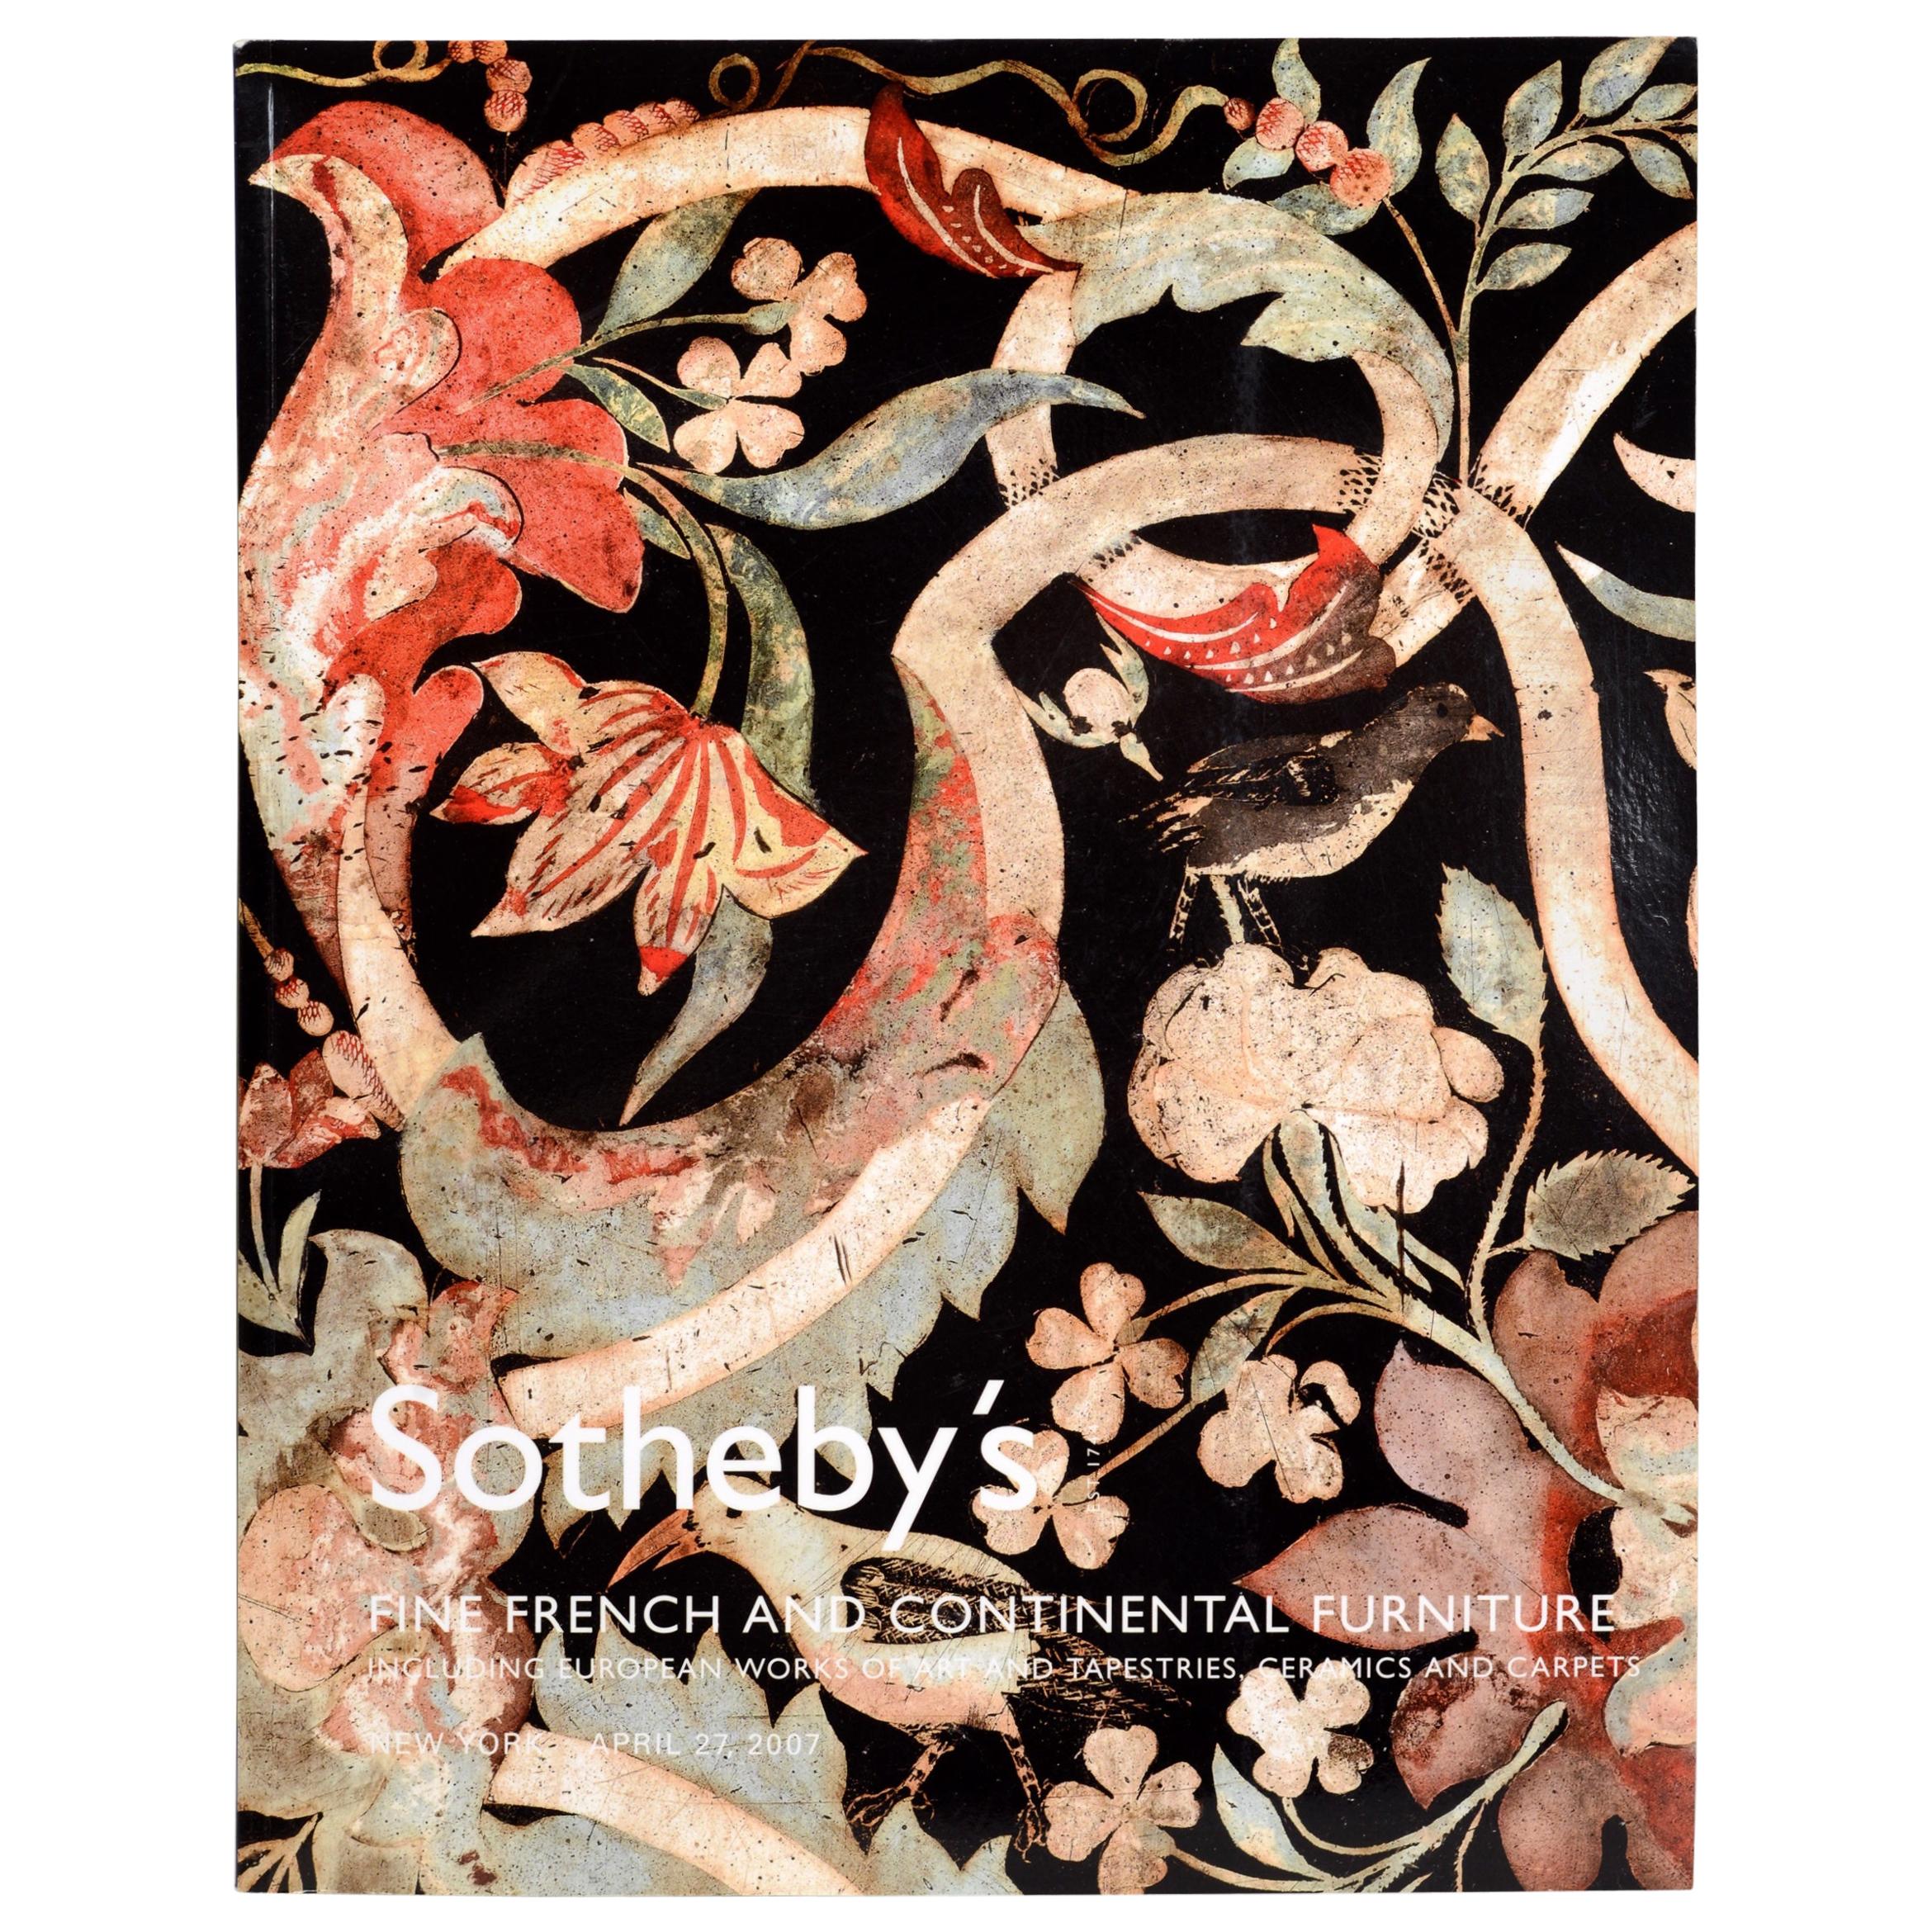 Sotheby's Fine French and Continental Furniture Including European Works of Art